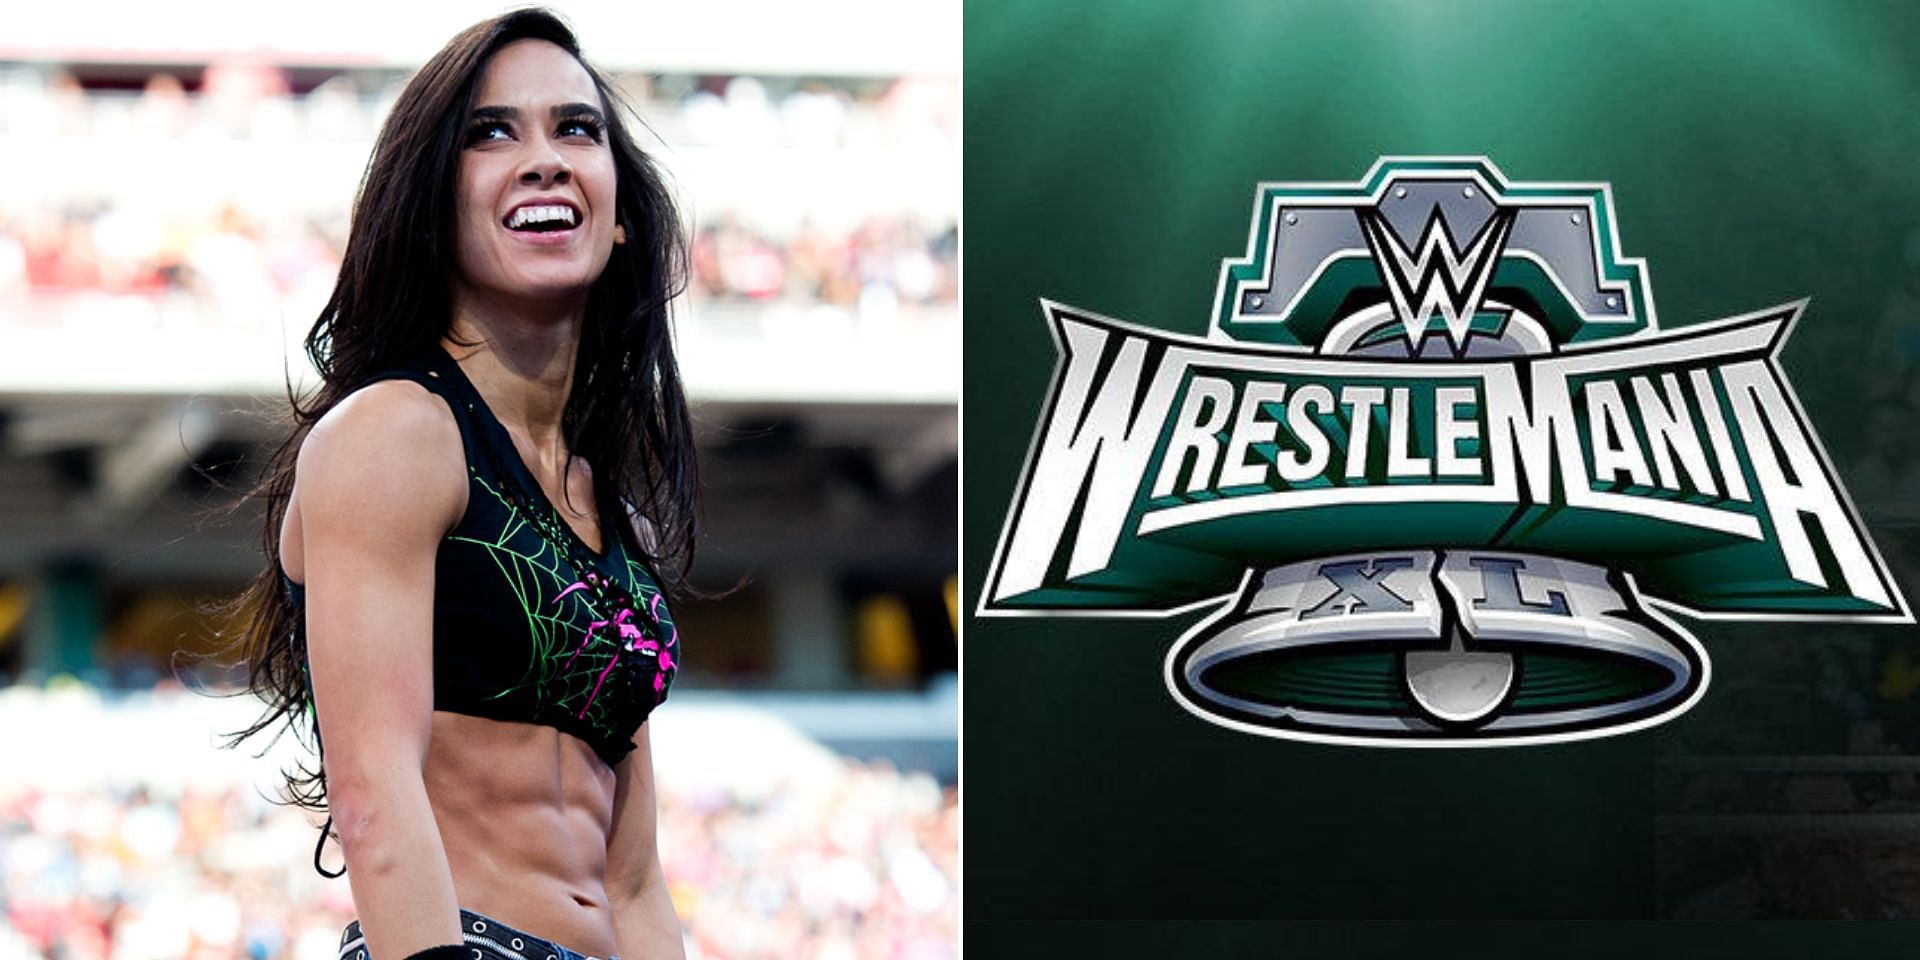 AJ Lee was mentioned at the WrestleMania press event